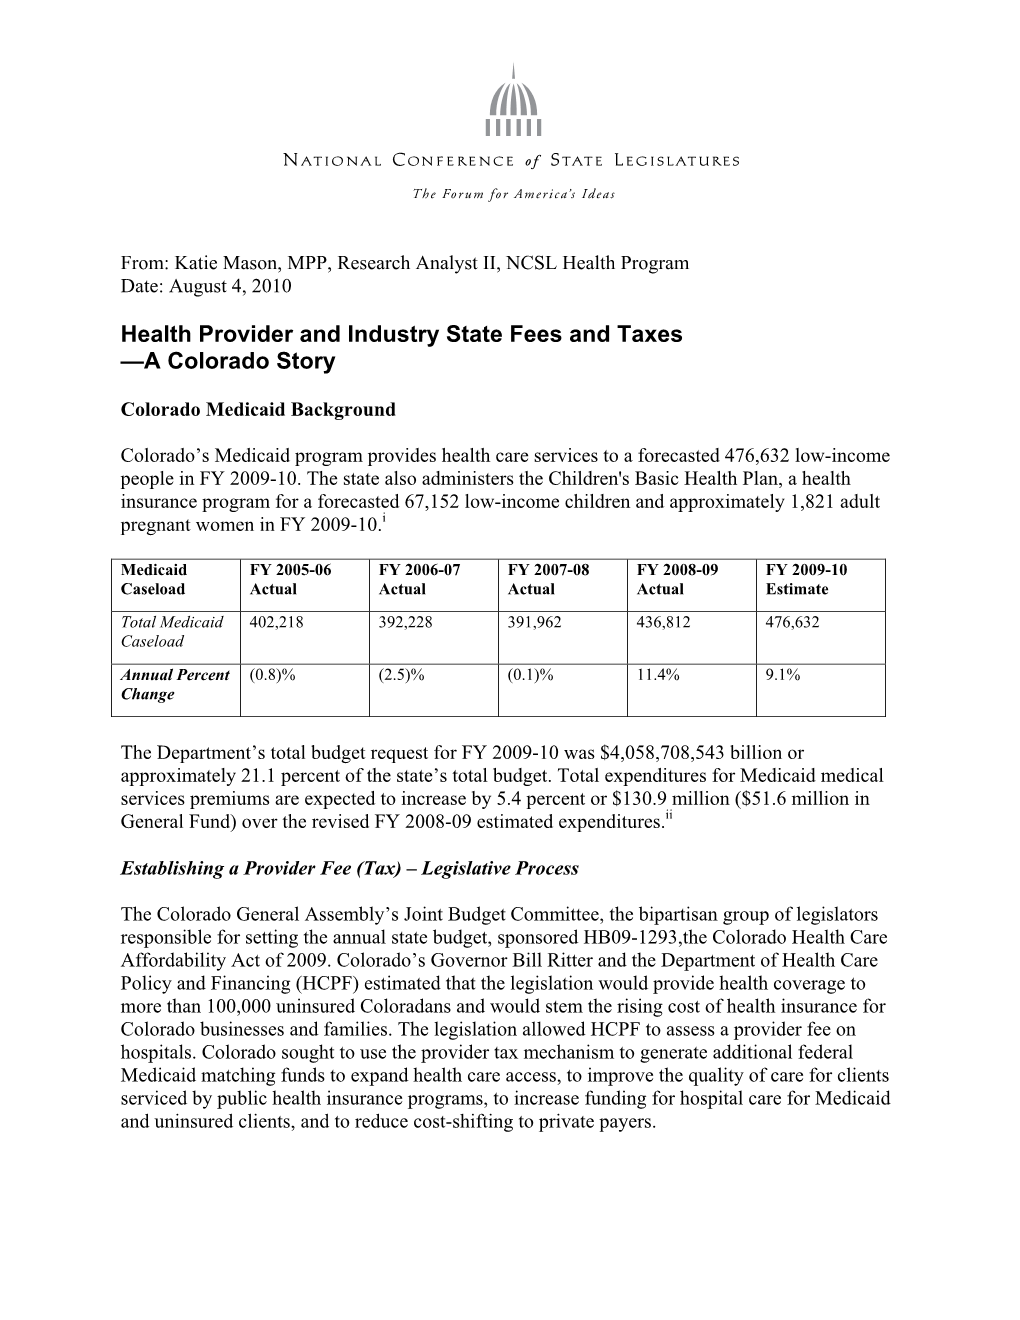 Health Provider and Industry State Fees and Taxes —A Colorado Story